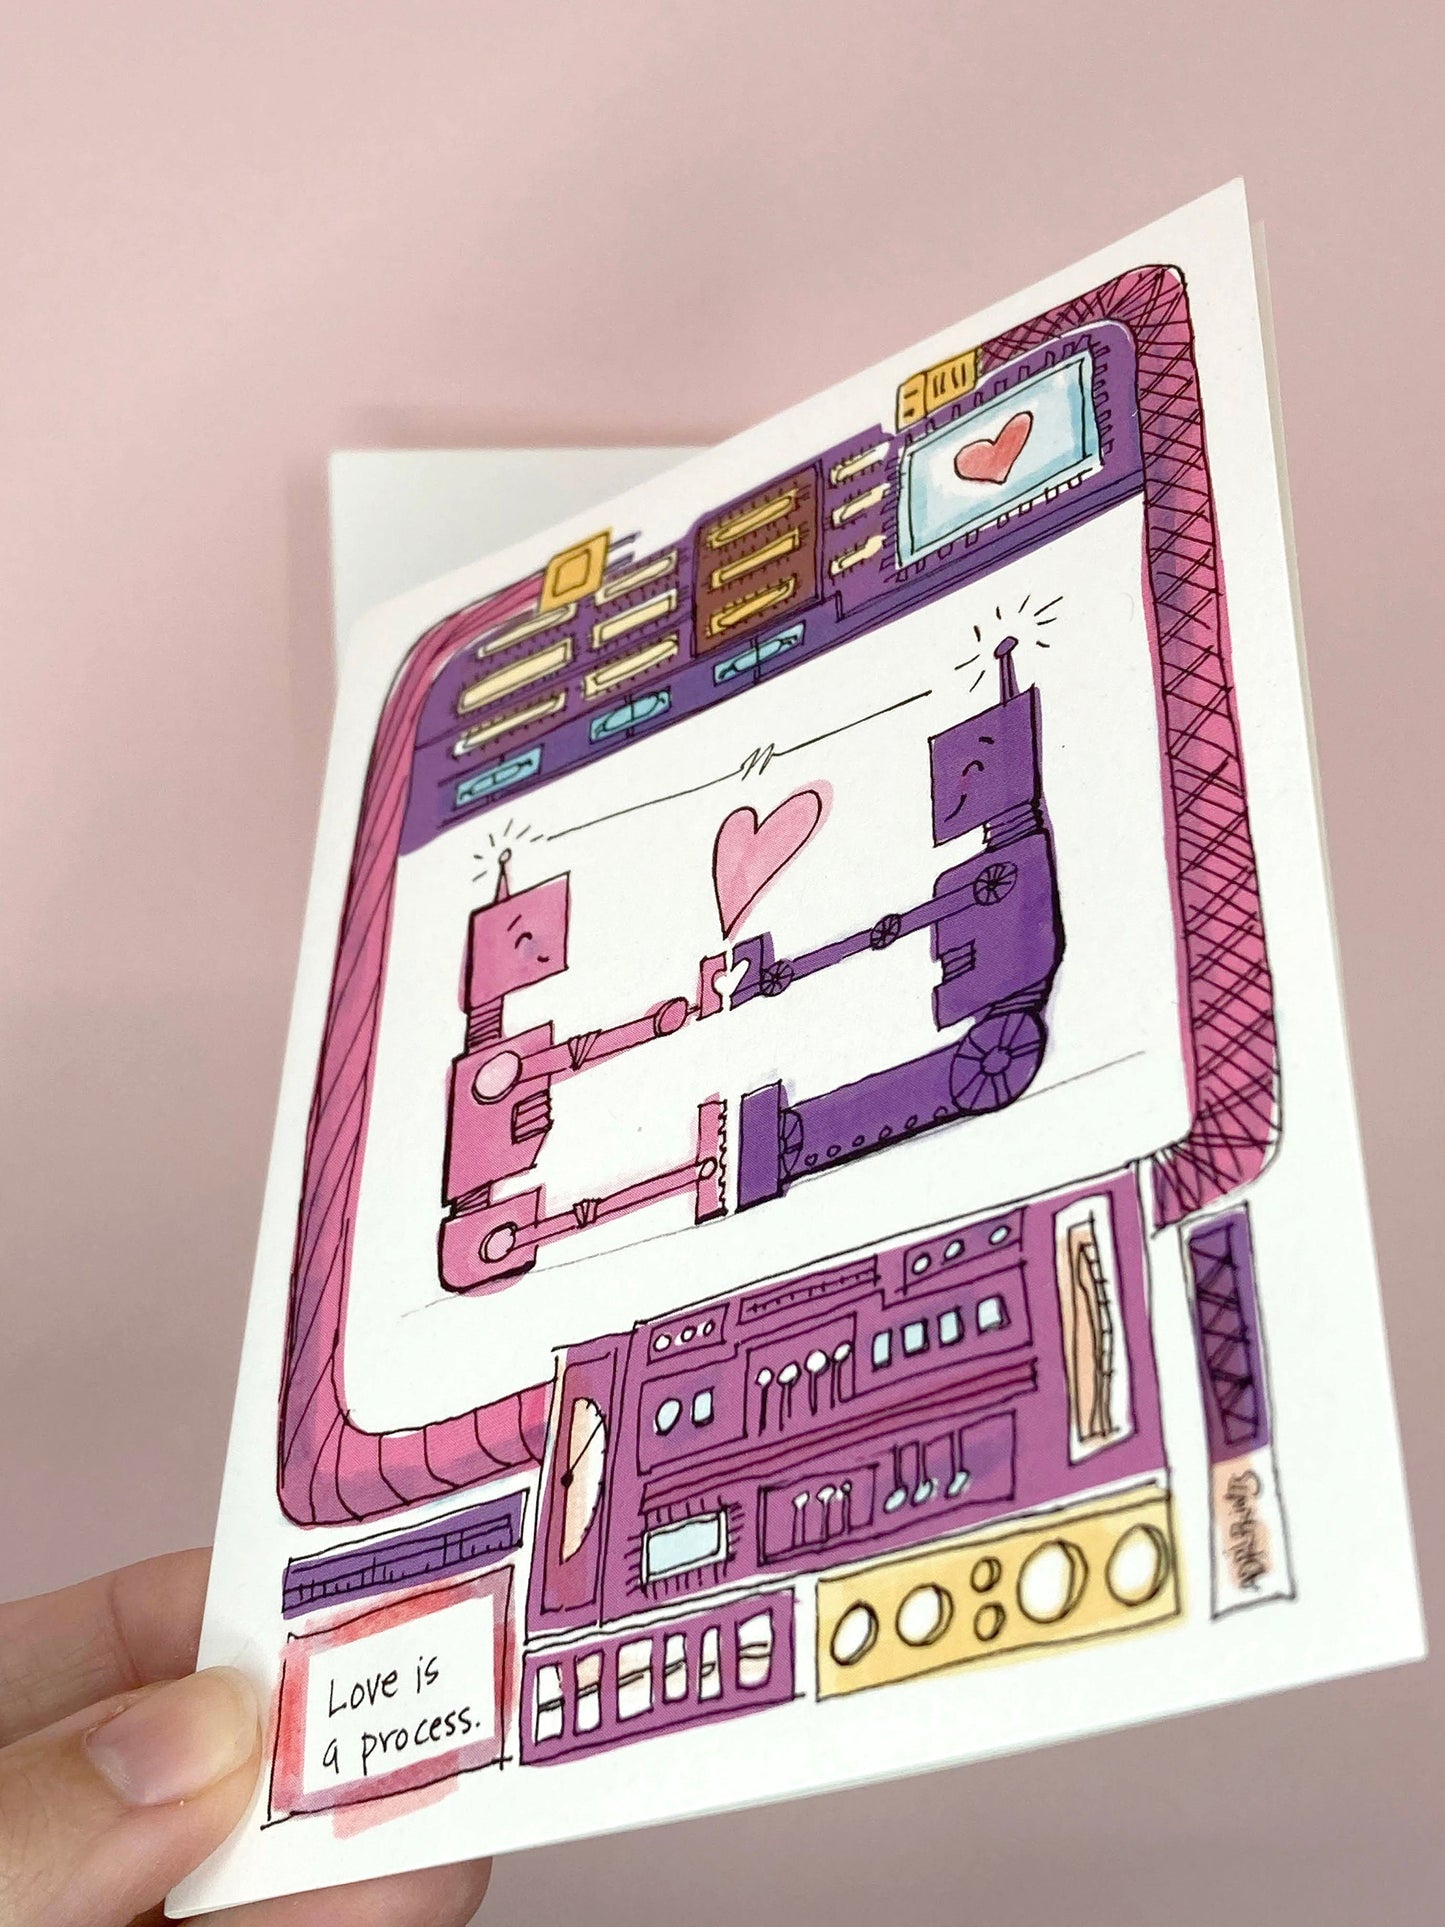 LOVE - Robots Connection - Greeting Card for Them, Anniversary, Valentine's Day, eco-friendly notecards by Adriana Bergstrom (Adriprints)